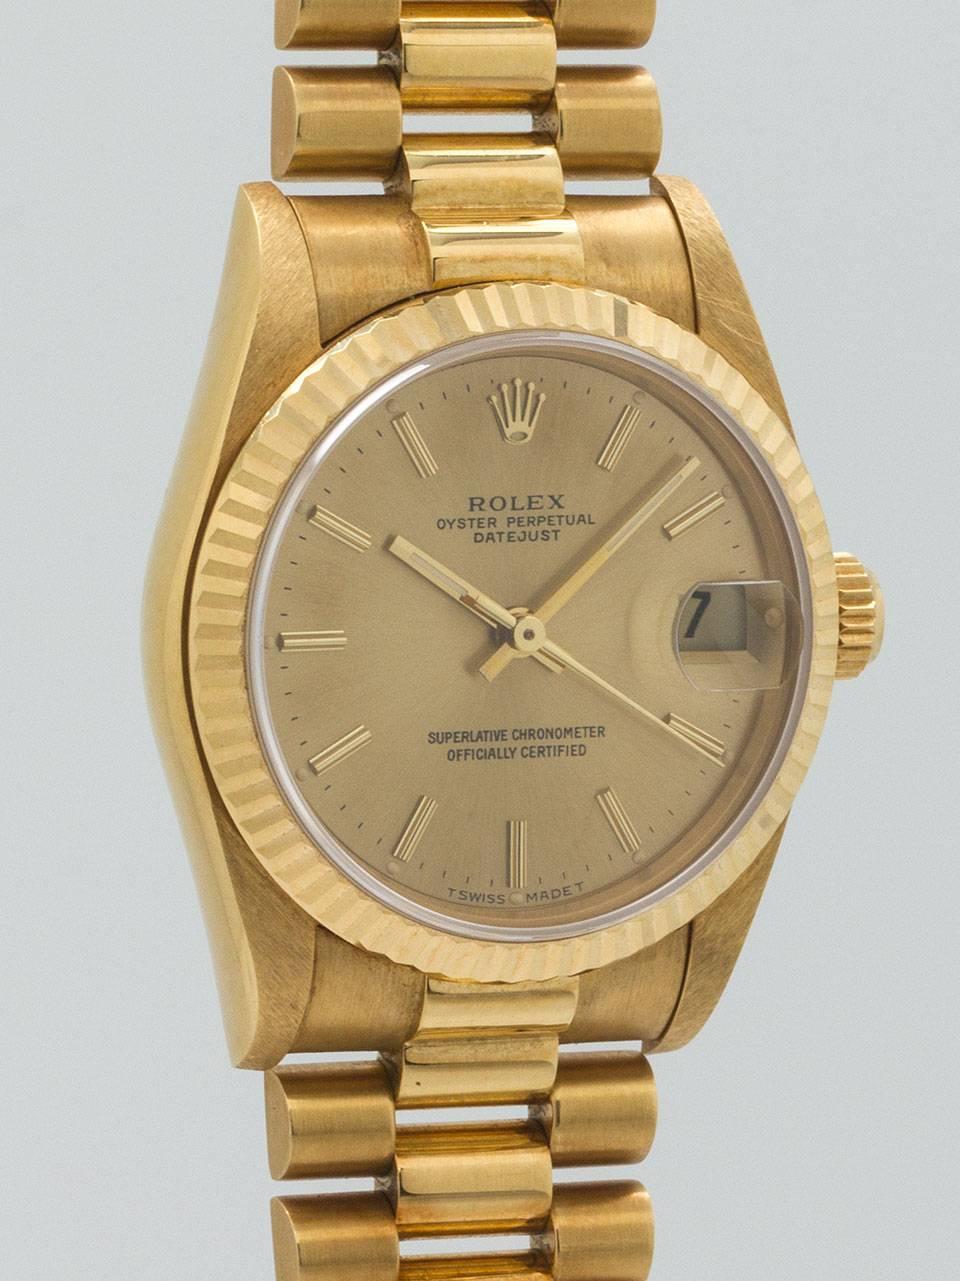 Rolex 18K Yellow Gold Midsize Datejust President ref 68278 serial number R4 circa 1987. Featuring 31mm diameter case with fluted bezel and sapphire crystal. Original champagne dial with gold applied indexes and gold baton hands. Powered by self